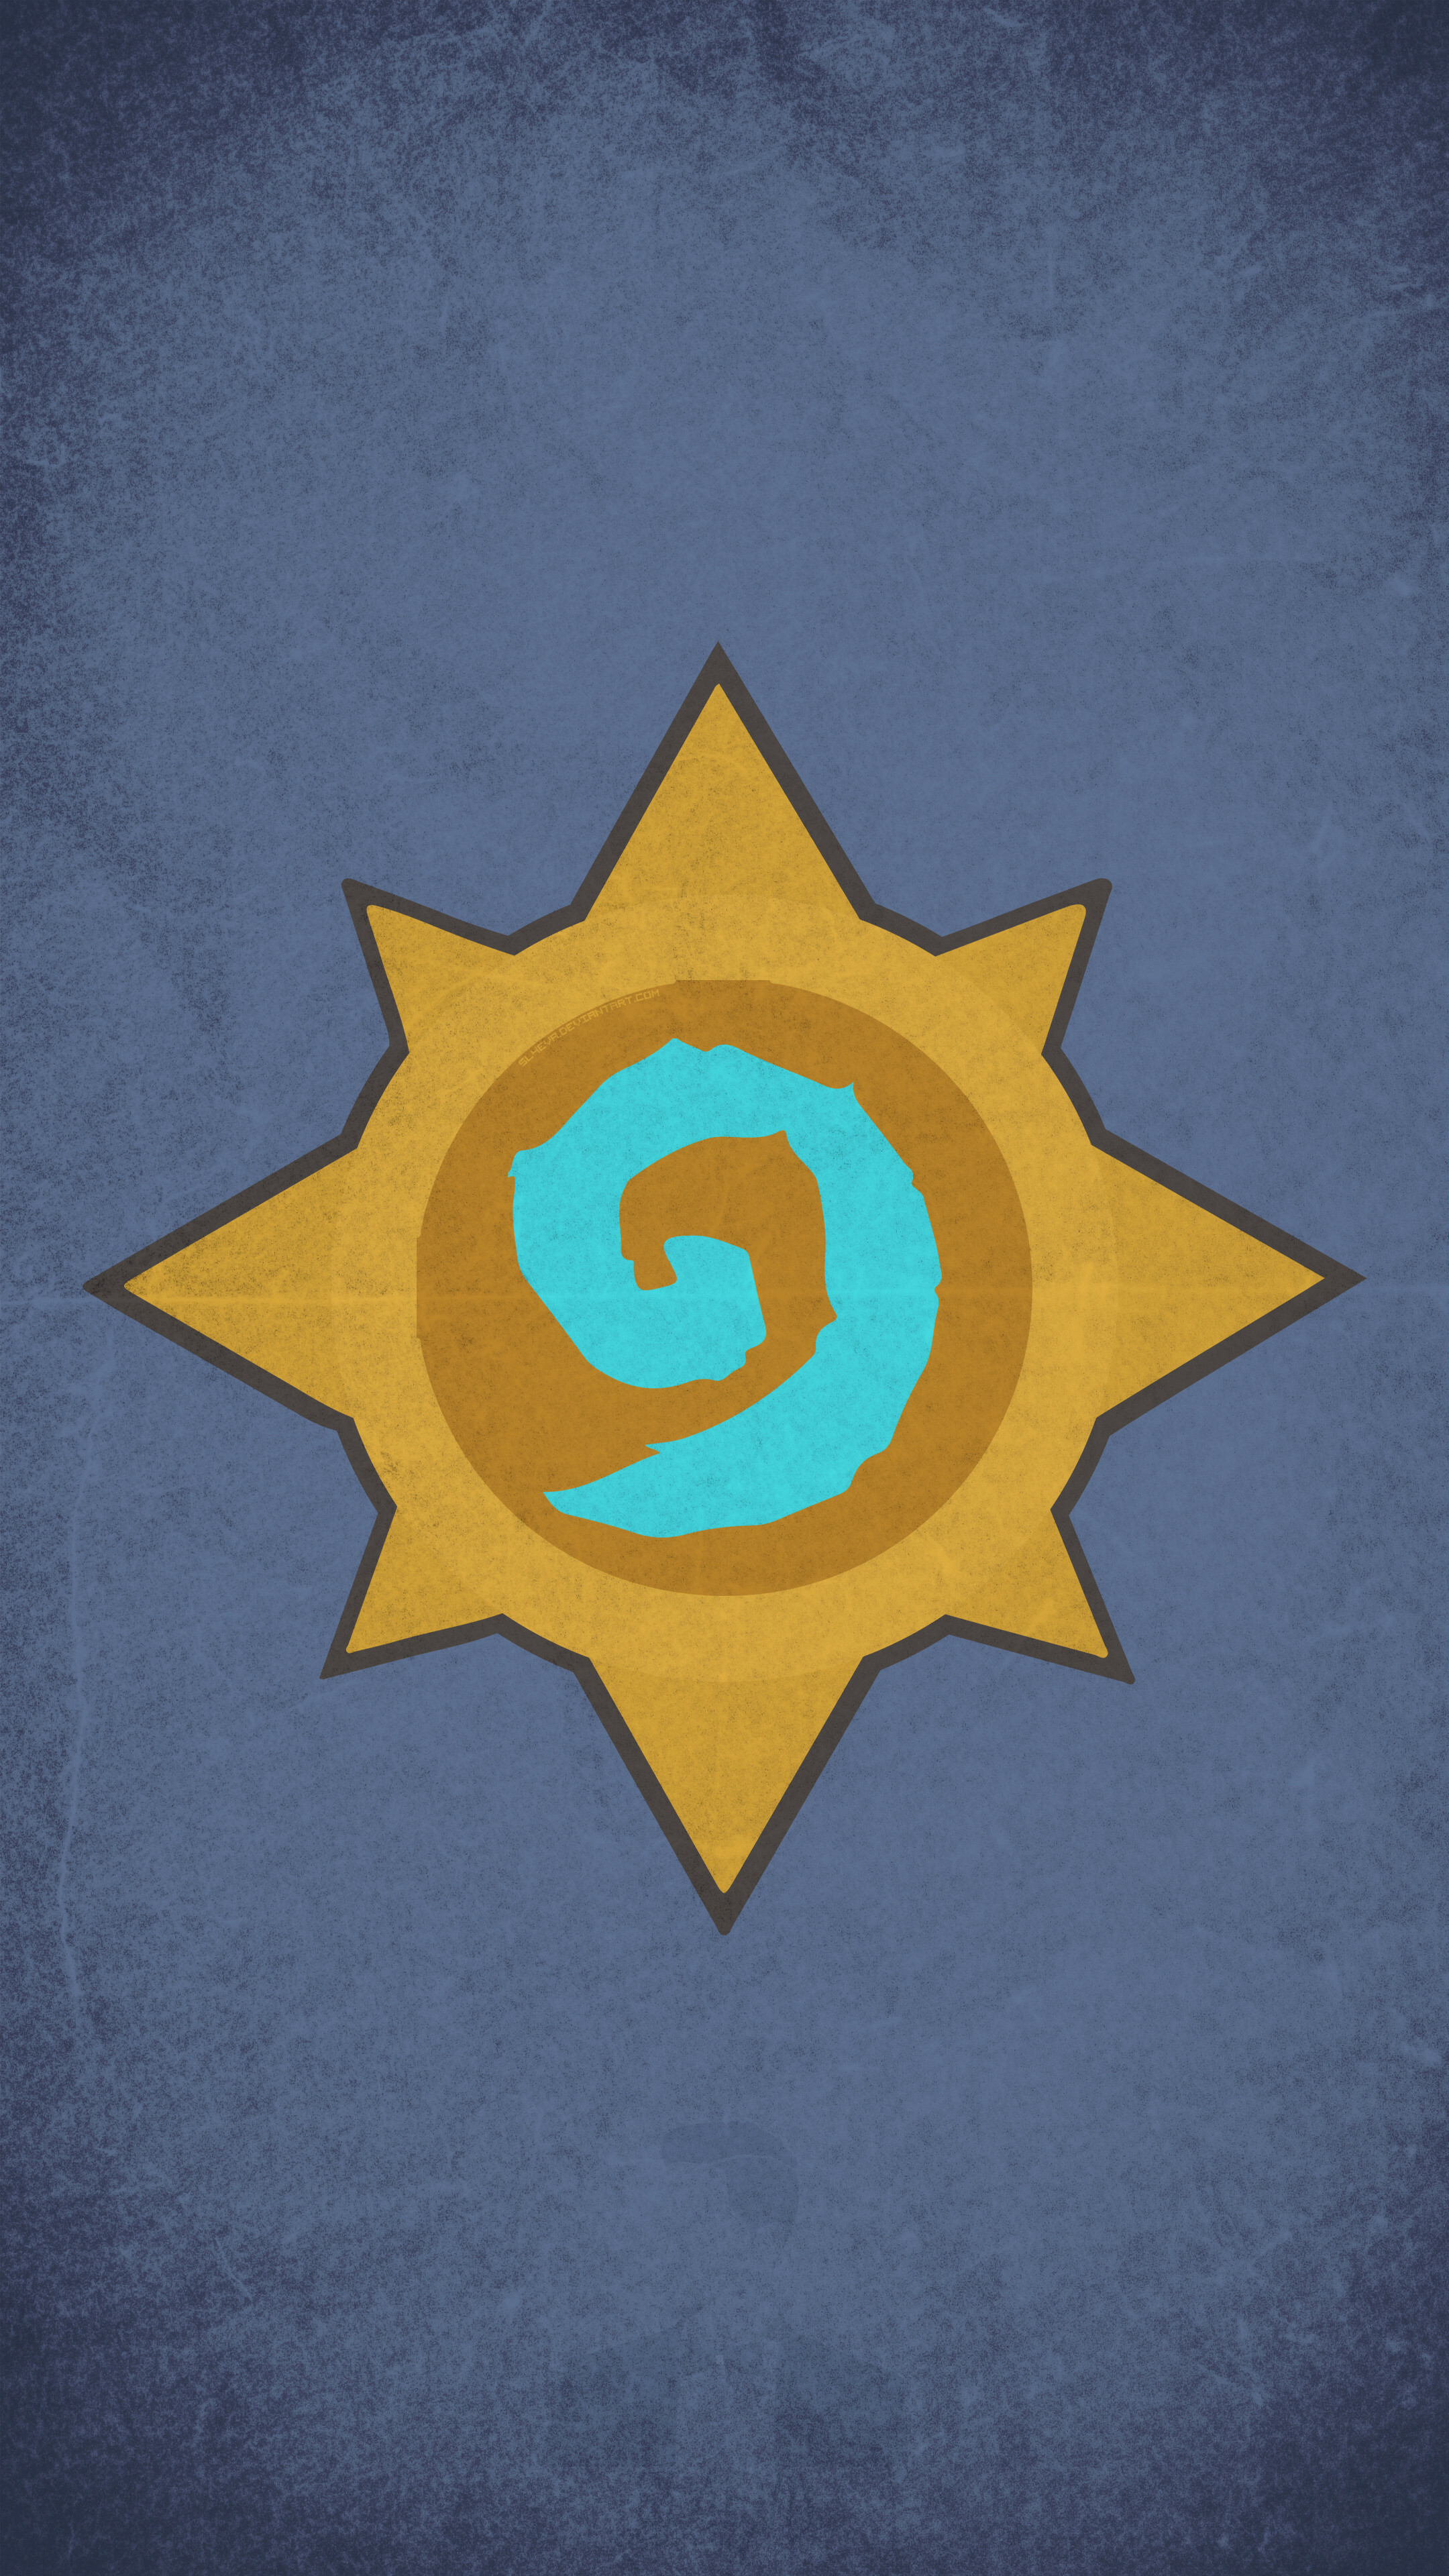 Hearthstone: The game is a turn-based card game between two opponents, using constructed decks of 30 cards along with a selected hero with a unique power. 2160x3840 4K Wallpaper.